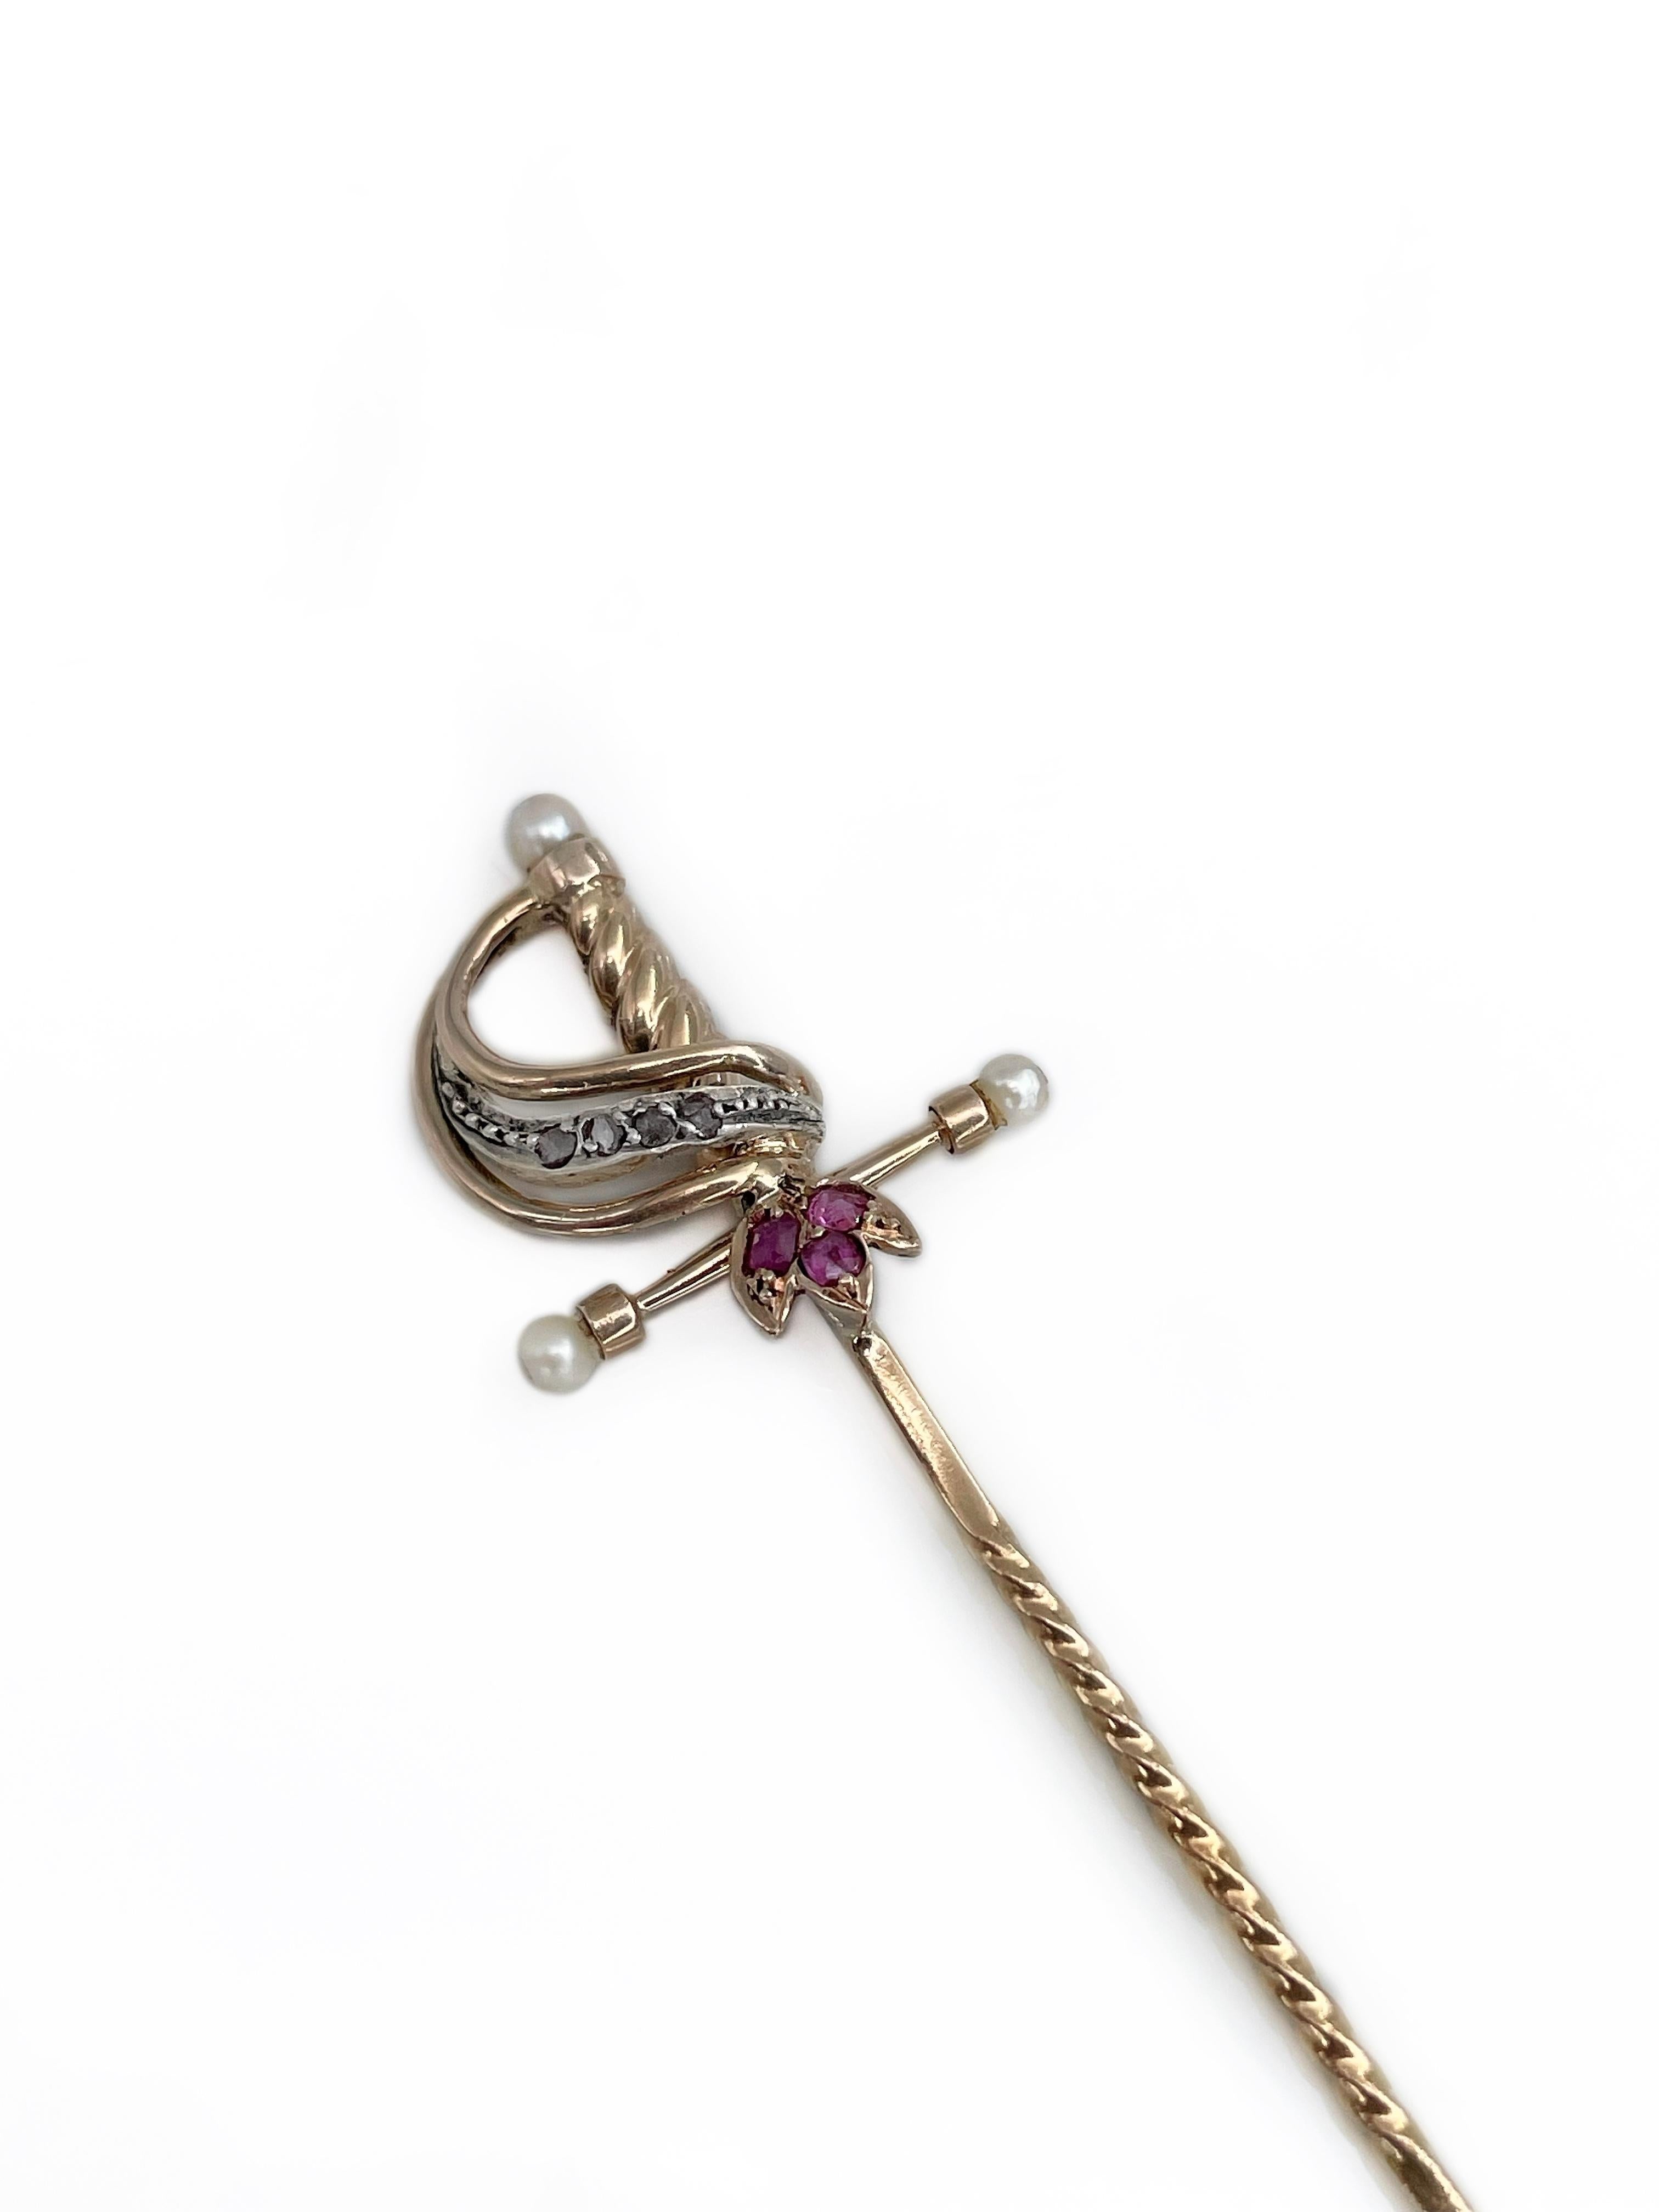 This is a Victorian bejeweled sword stick pin brooch. It is crafted in 18K yellow gold. The piece features rubies, old cut diamonds and seed pearls. 

Weight: 2.22g
Length: 7.5cm
Width (at max): 1.5cm

———

If you have any questions, please feel